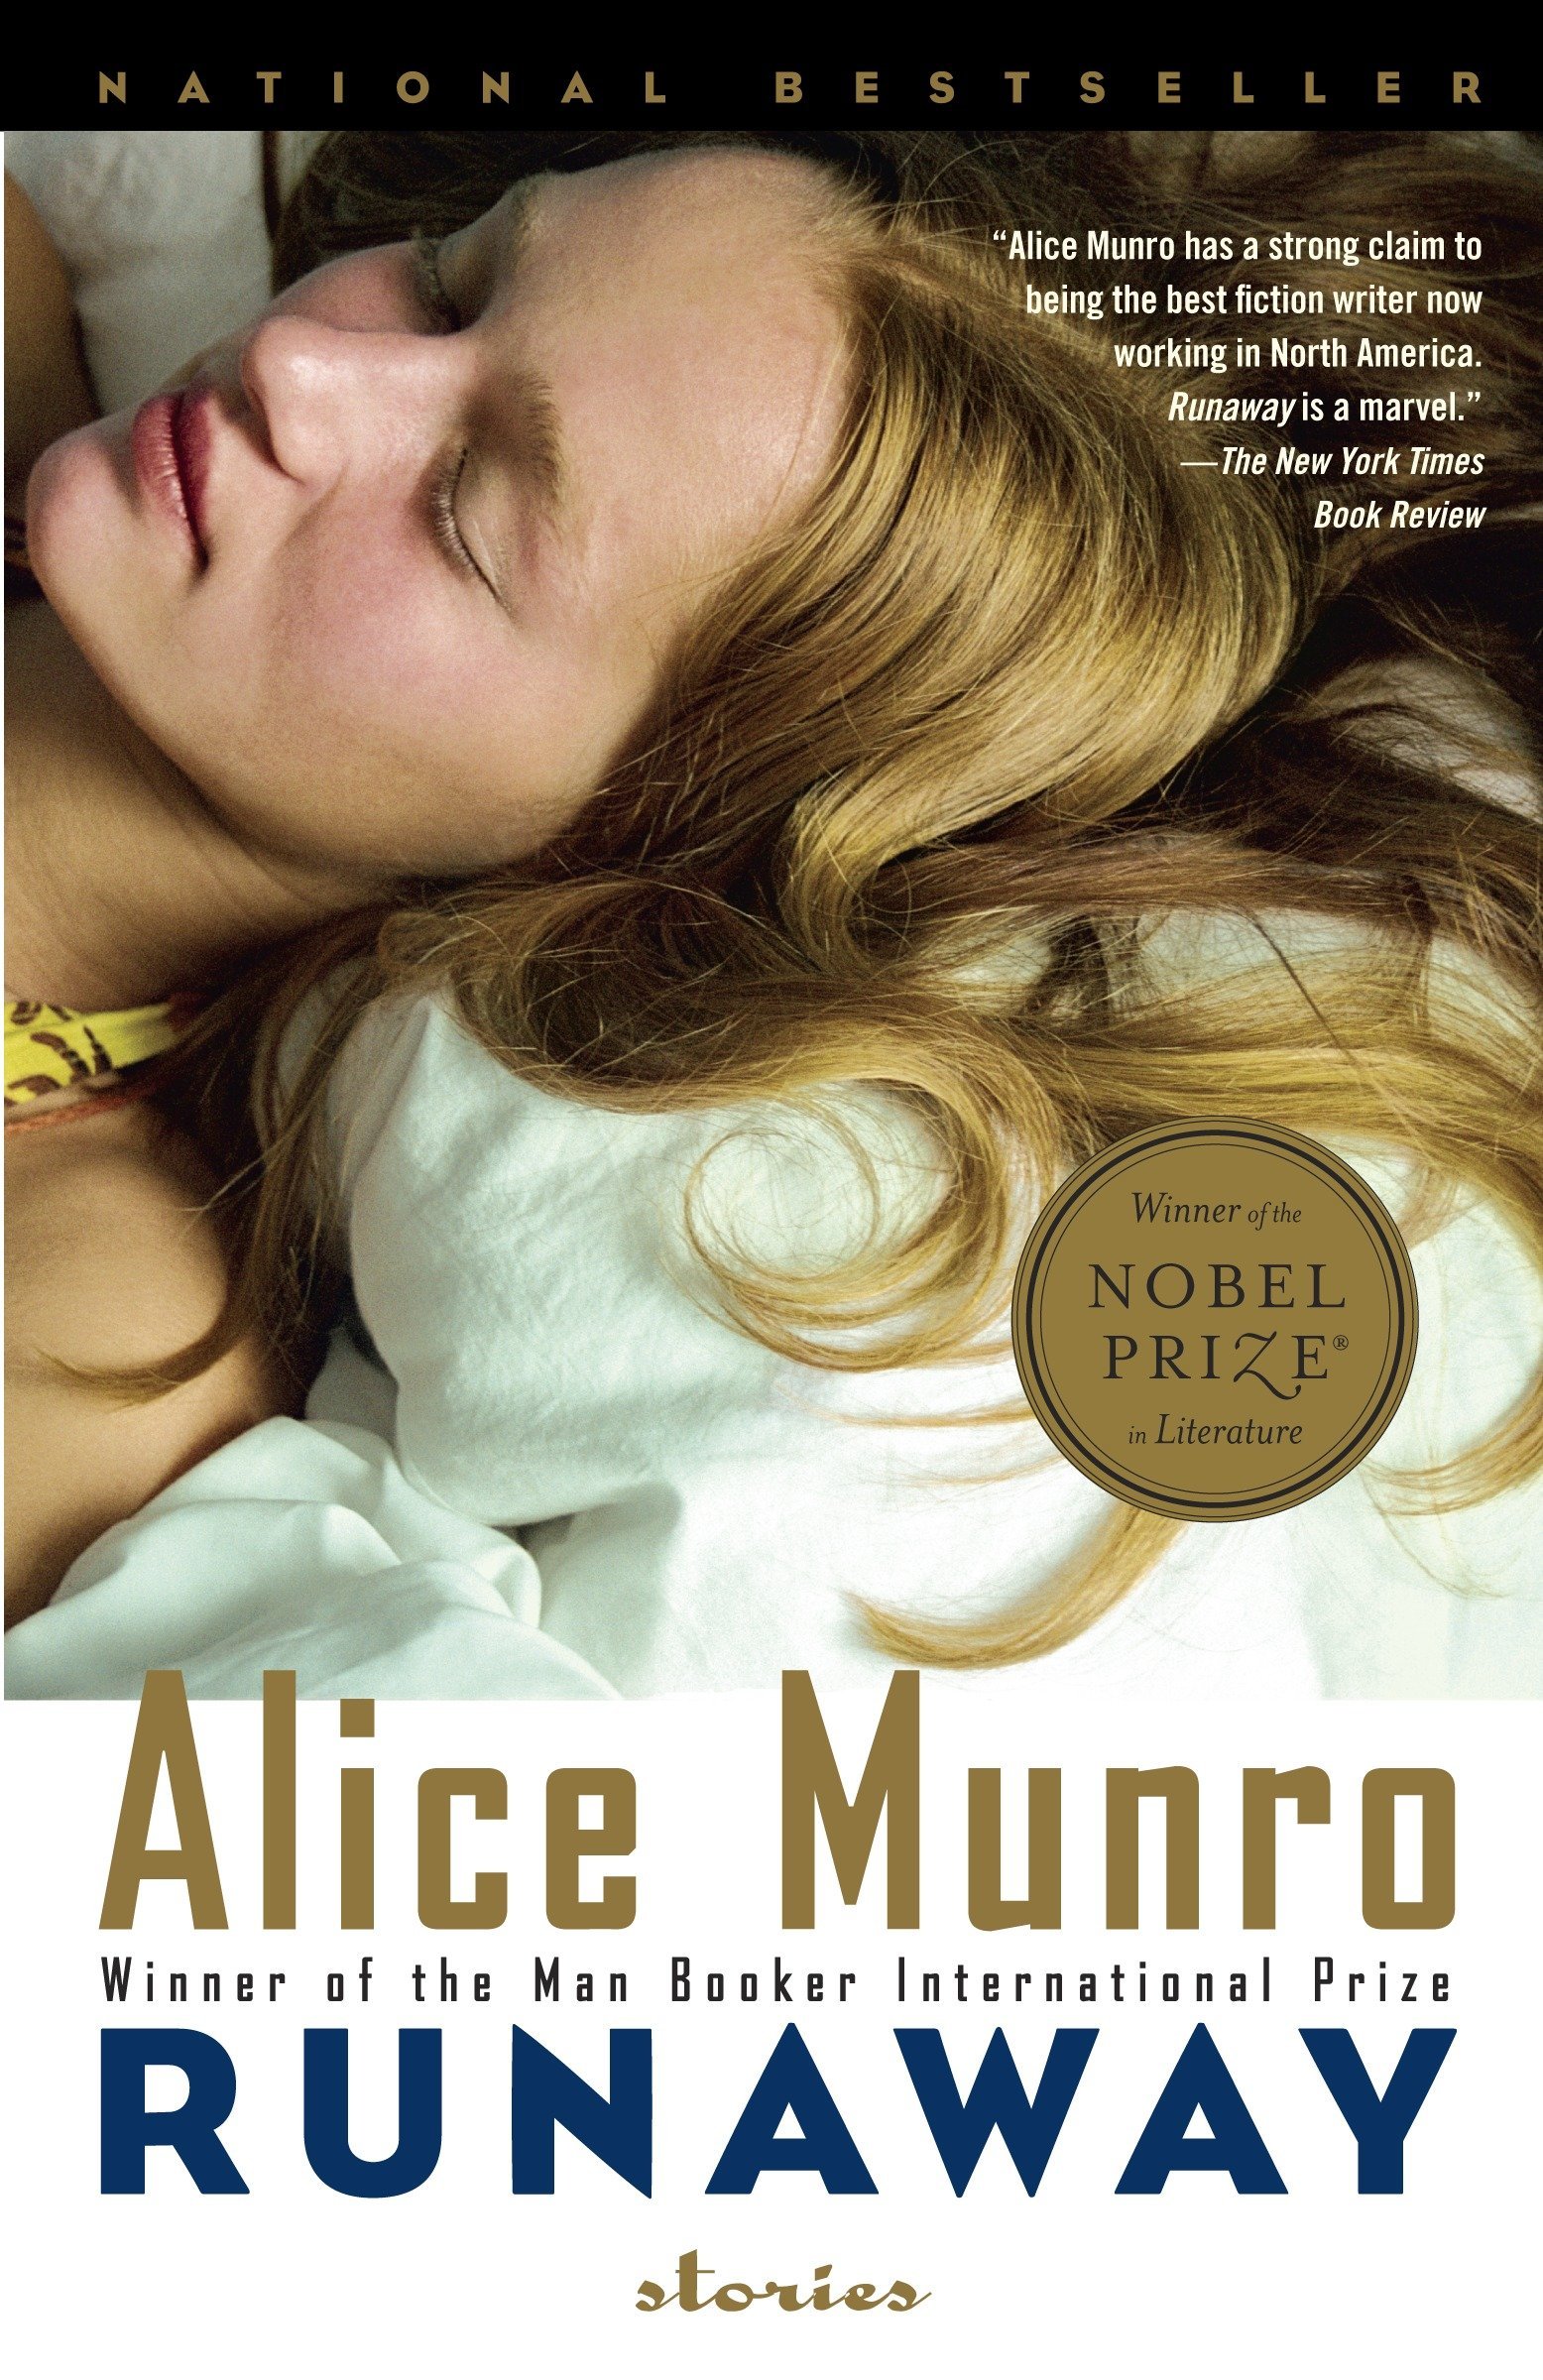  Munro is by far my favorite author of all time. I only chose her collection “Runaway” to be featured here because it was the first book I read of Munro’s before getting swept away by everything else she has written. 